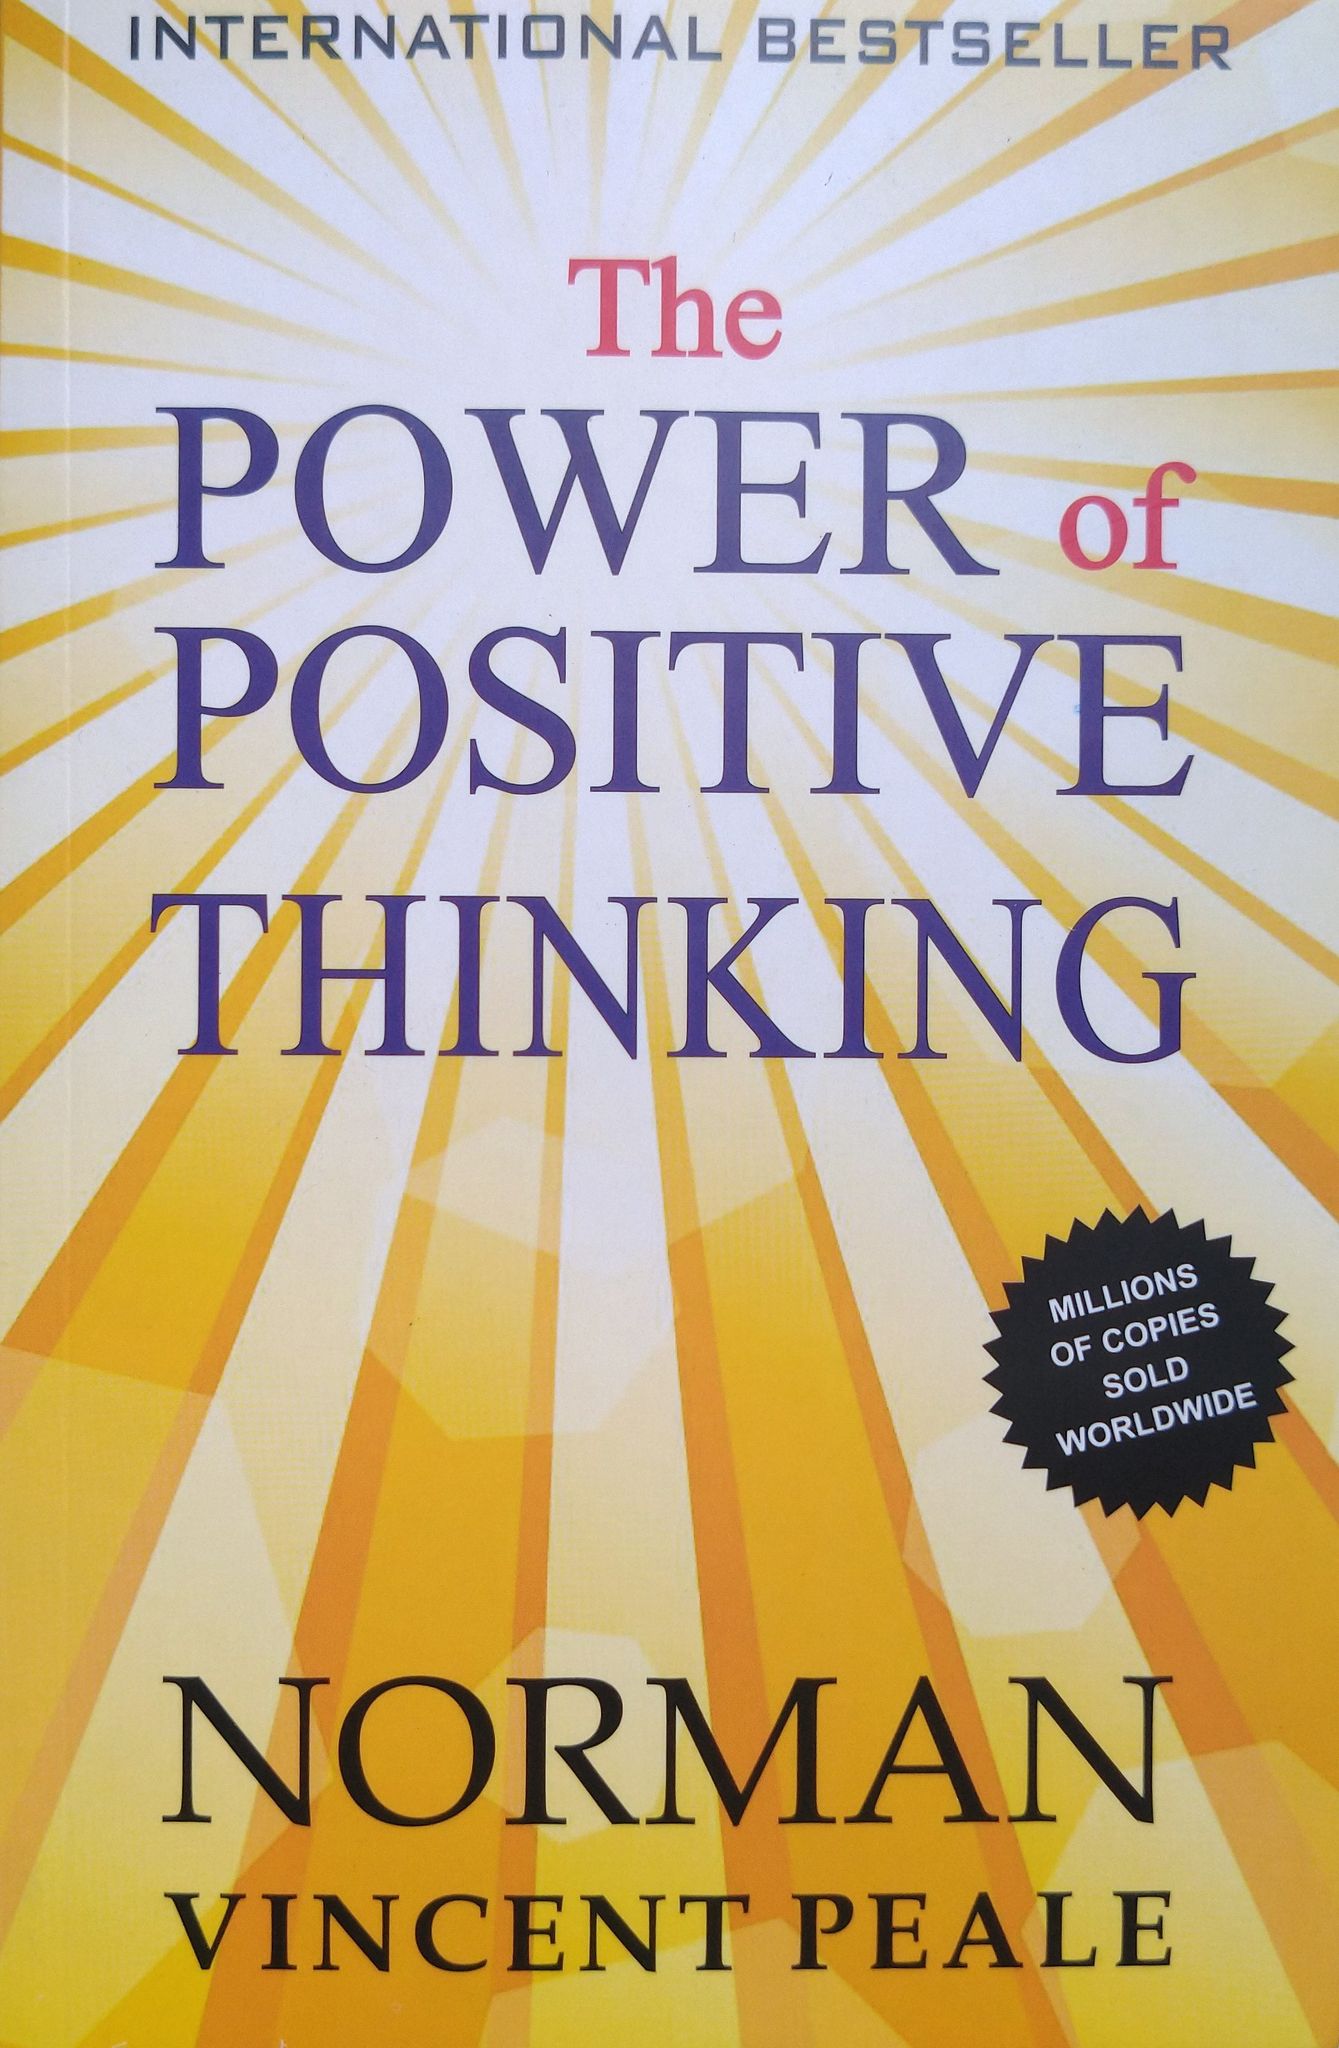 The Power Of Positive Thinking  (Original Copy)